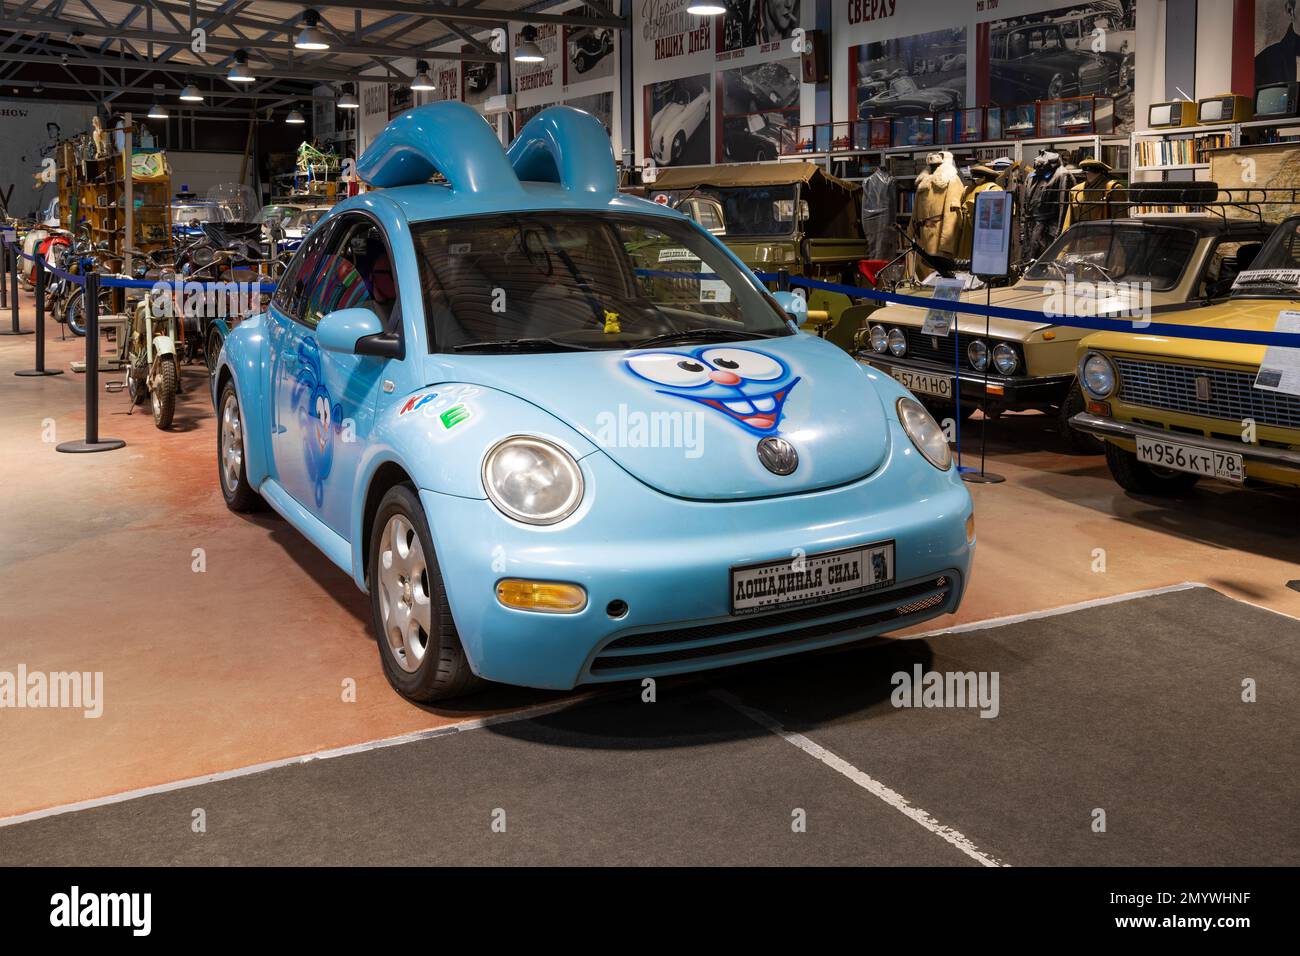 ZELENOGORSK, RUSSIA - JANUARY 27, 2021: Volkswagen New Beetle car made in the form of one of the characters of the animated series 'Smeshariki' Stock Photo